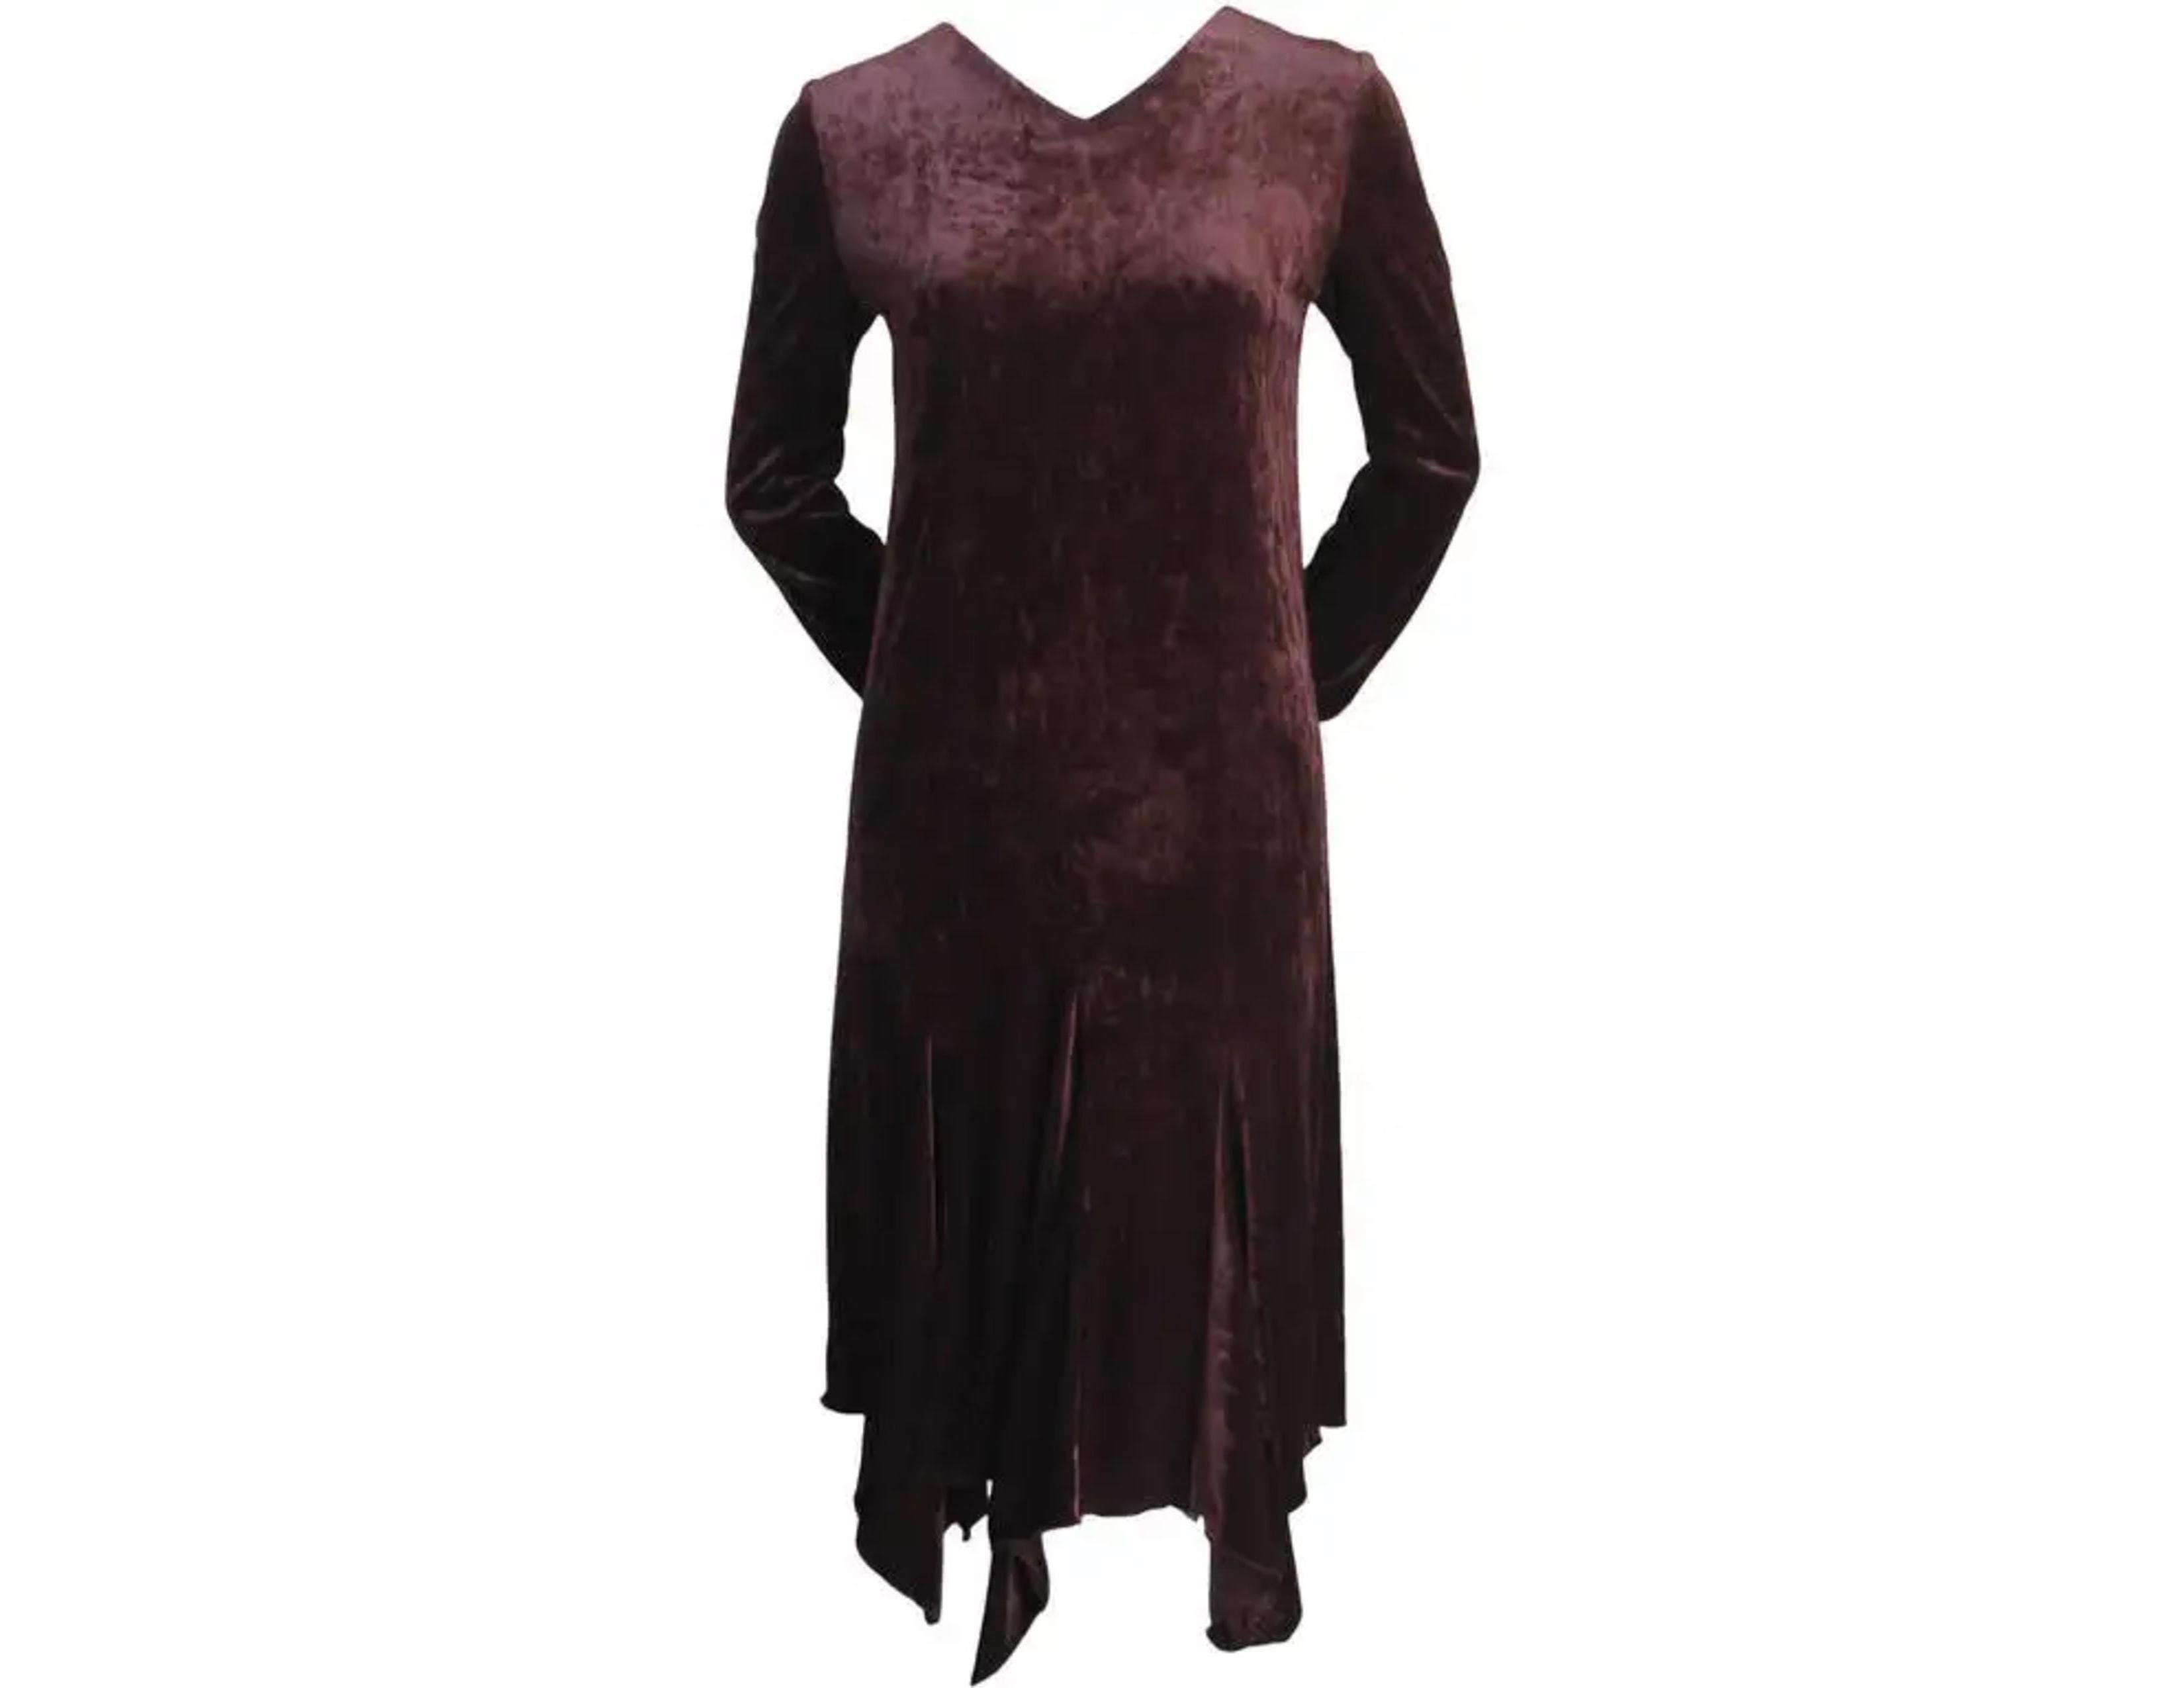 Brown velvet dress with v-neck and asymmetrical hemline from Romeo Gigli dating to the 1990's. Fits a size 6 or 8. Approximate measurements: shoulder 16